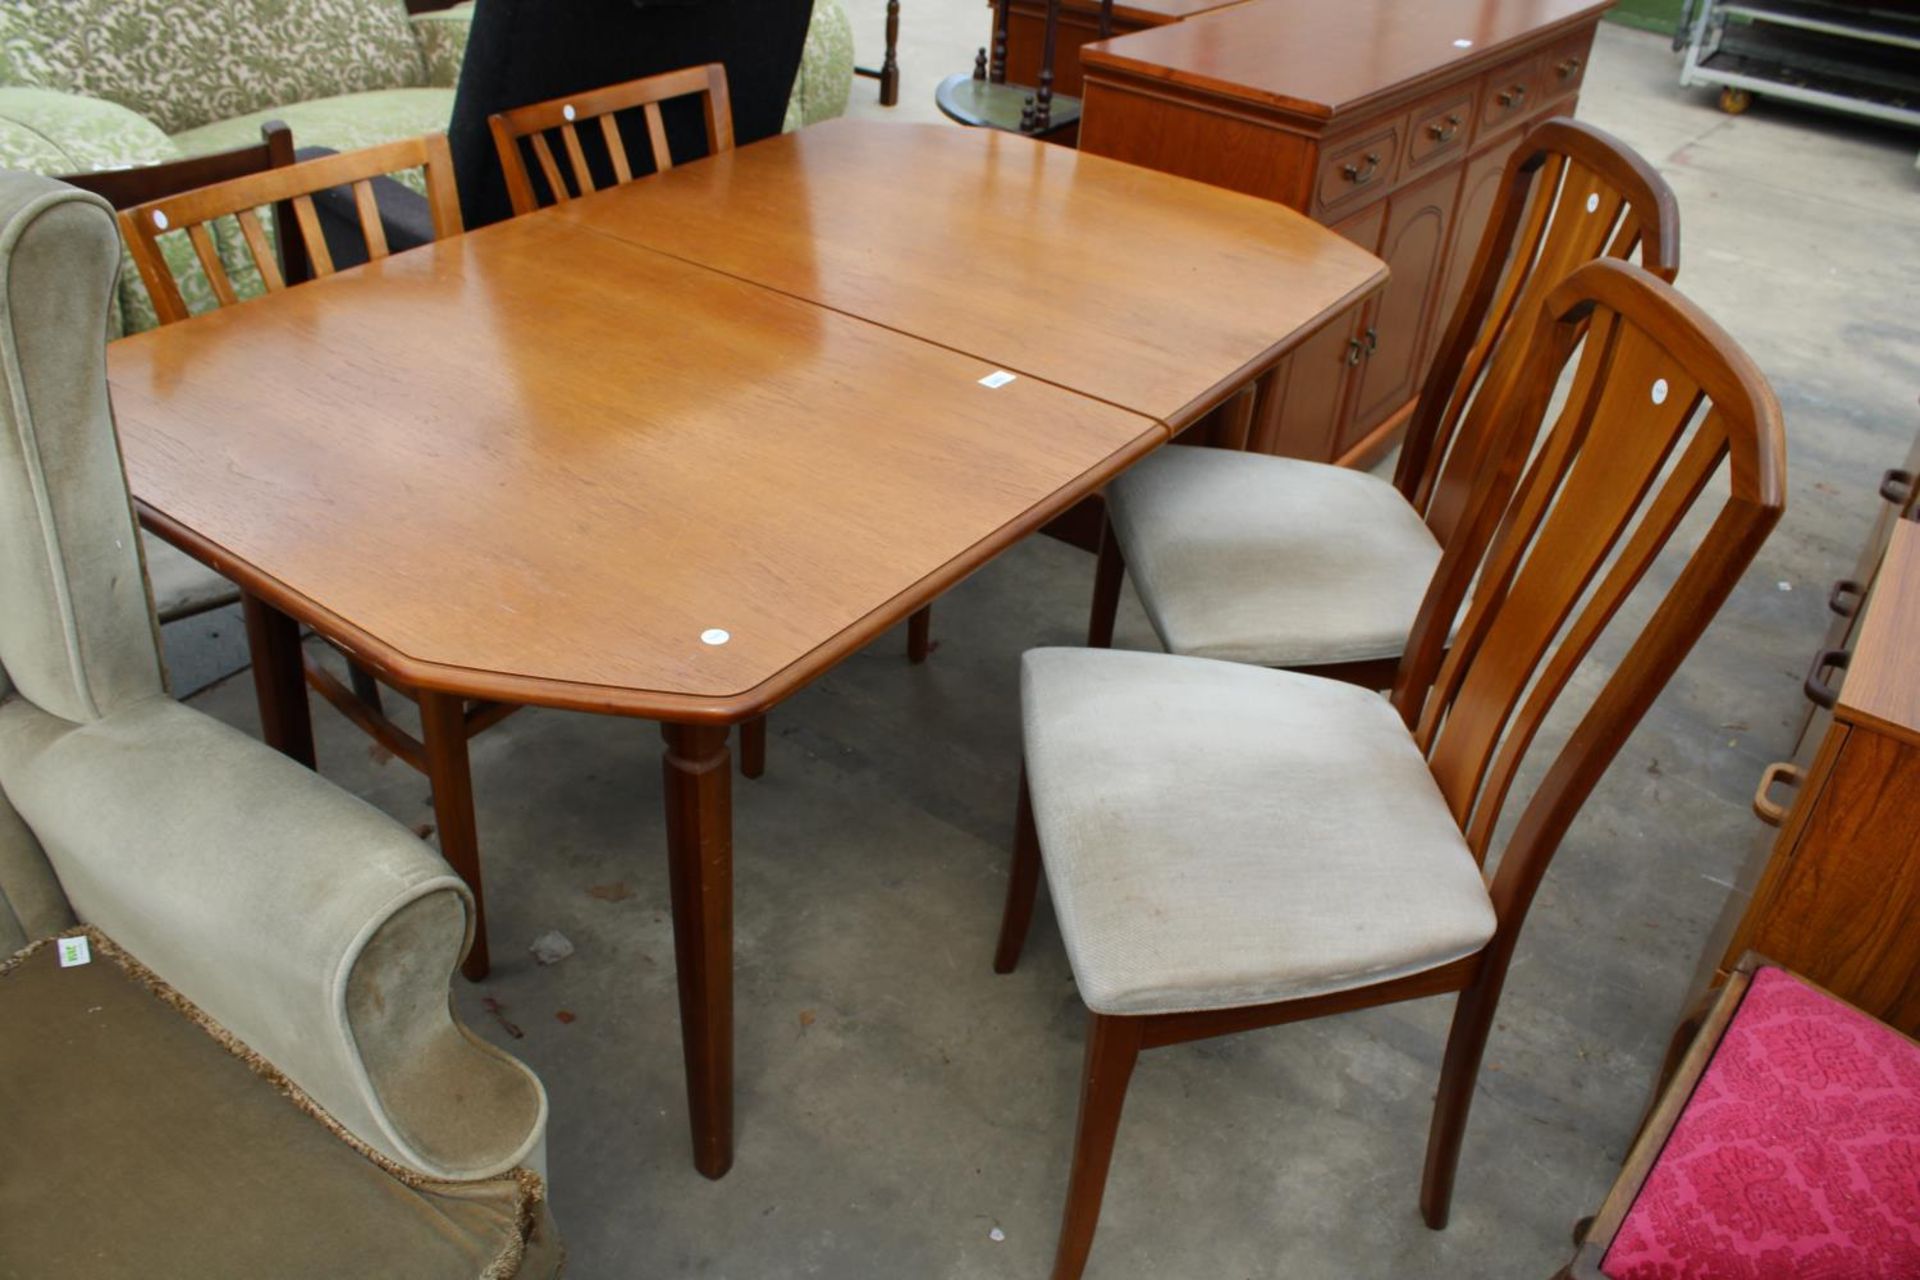 A RETRO TEAK MEREDEW EXTENDING DINING TABLE, 59" X 36" (LEAF 20") AND TWO DINING CHAIRS - Image 2 of 3